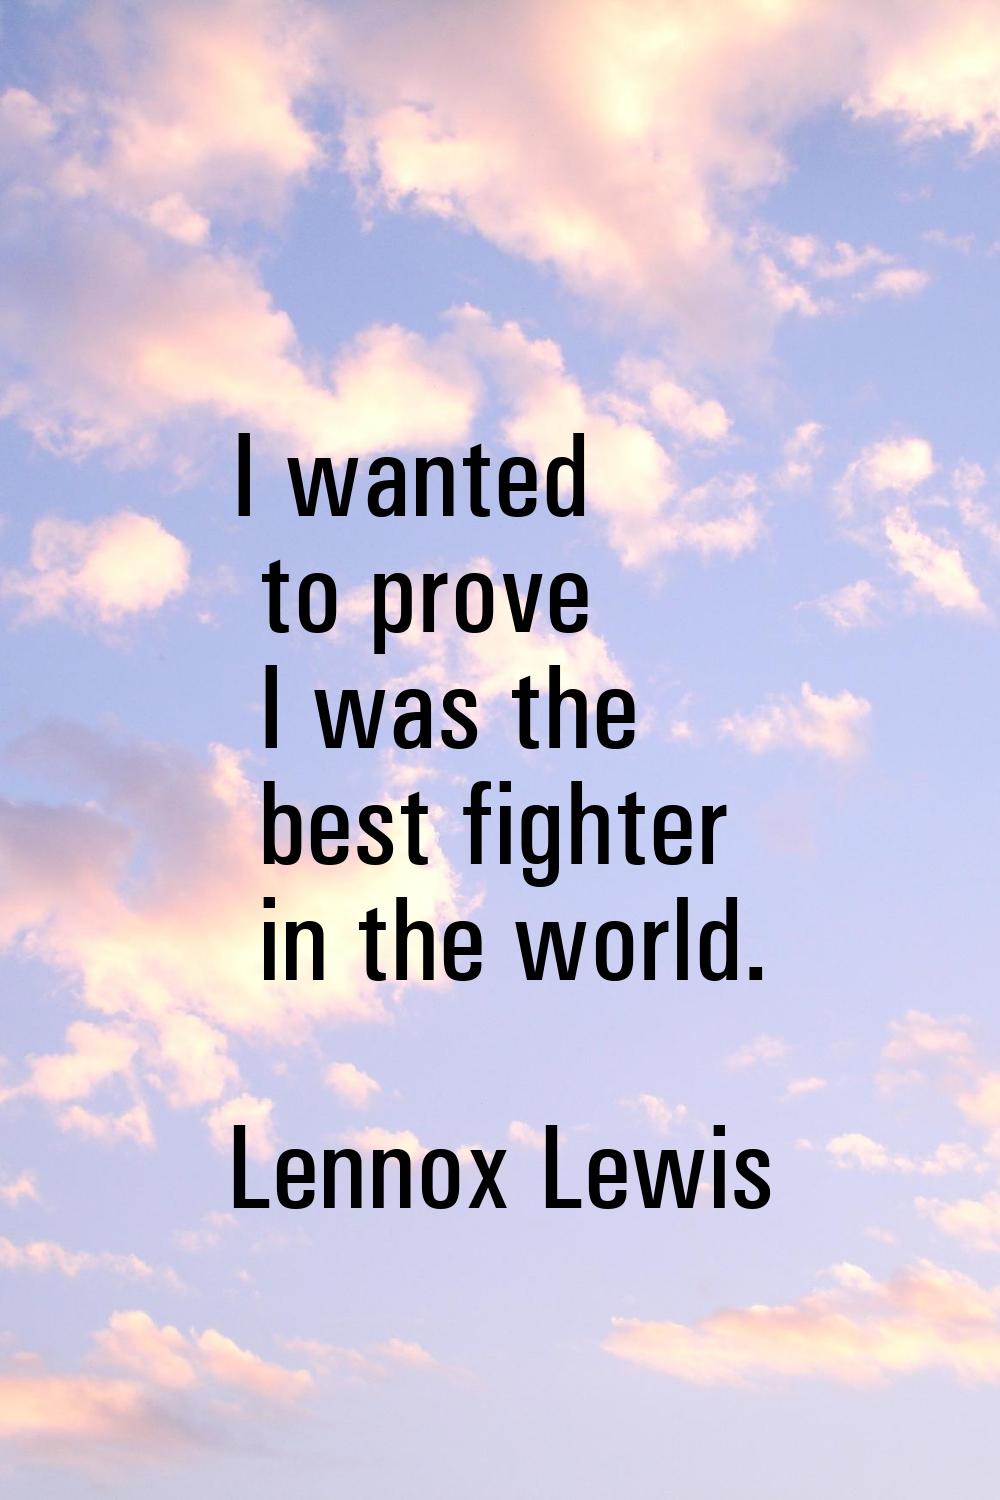 I wanted to prove I was the best fighter in the world.